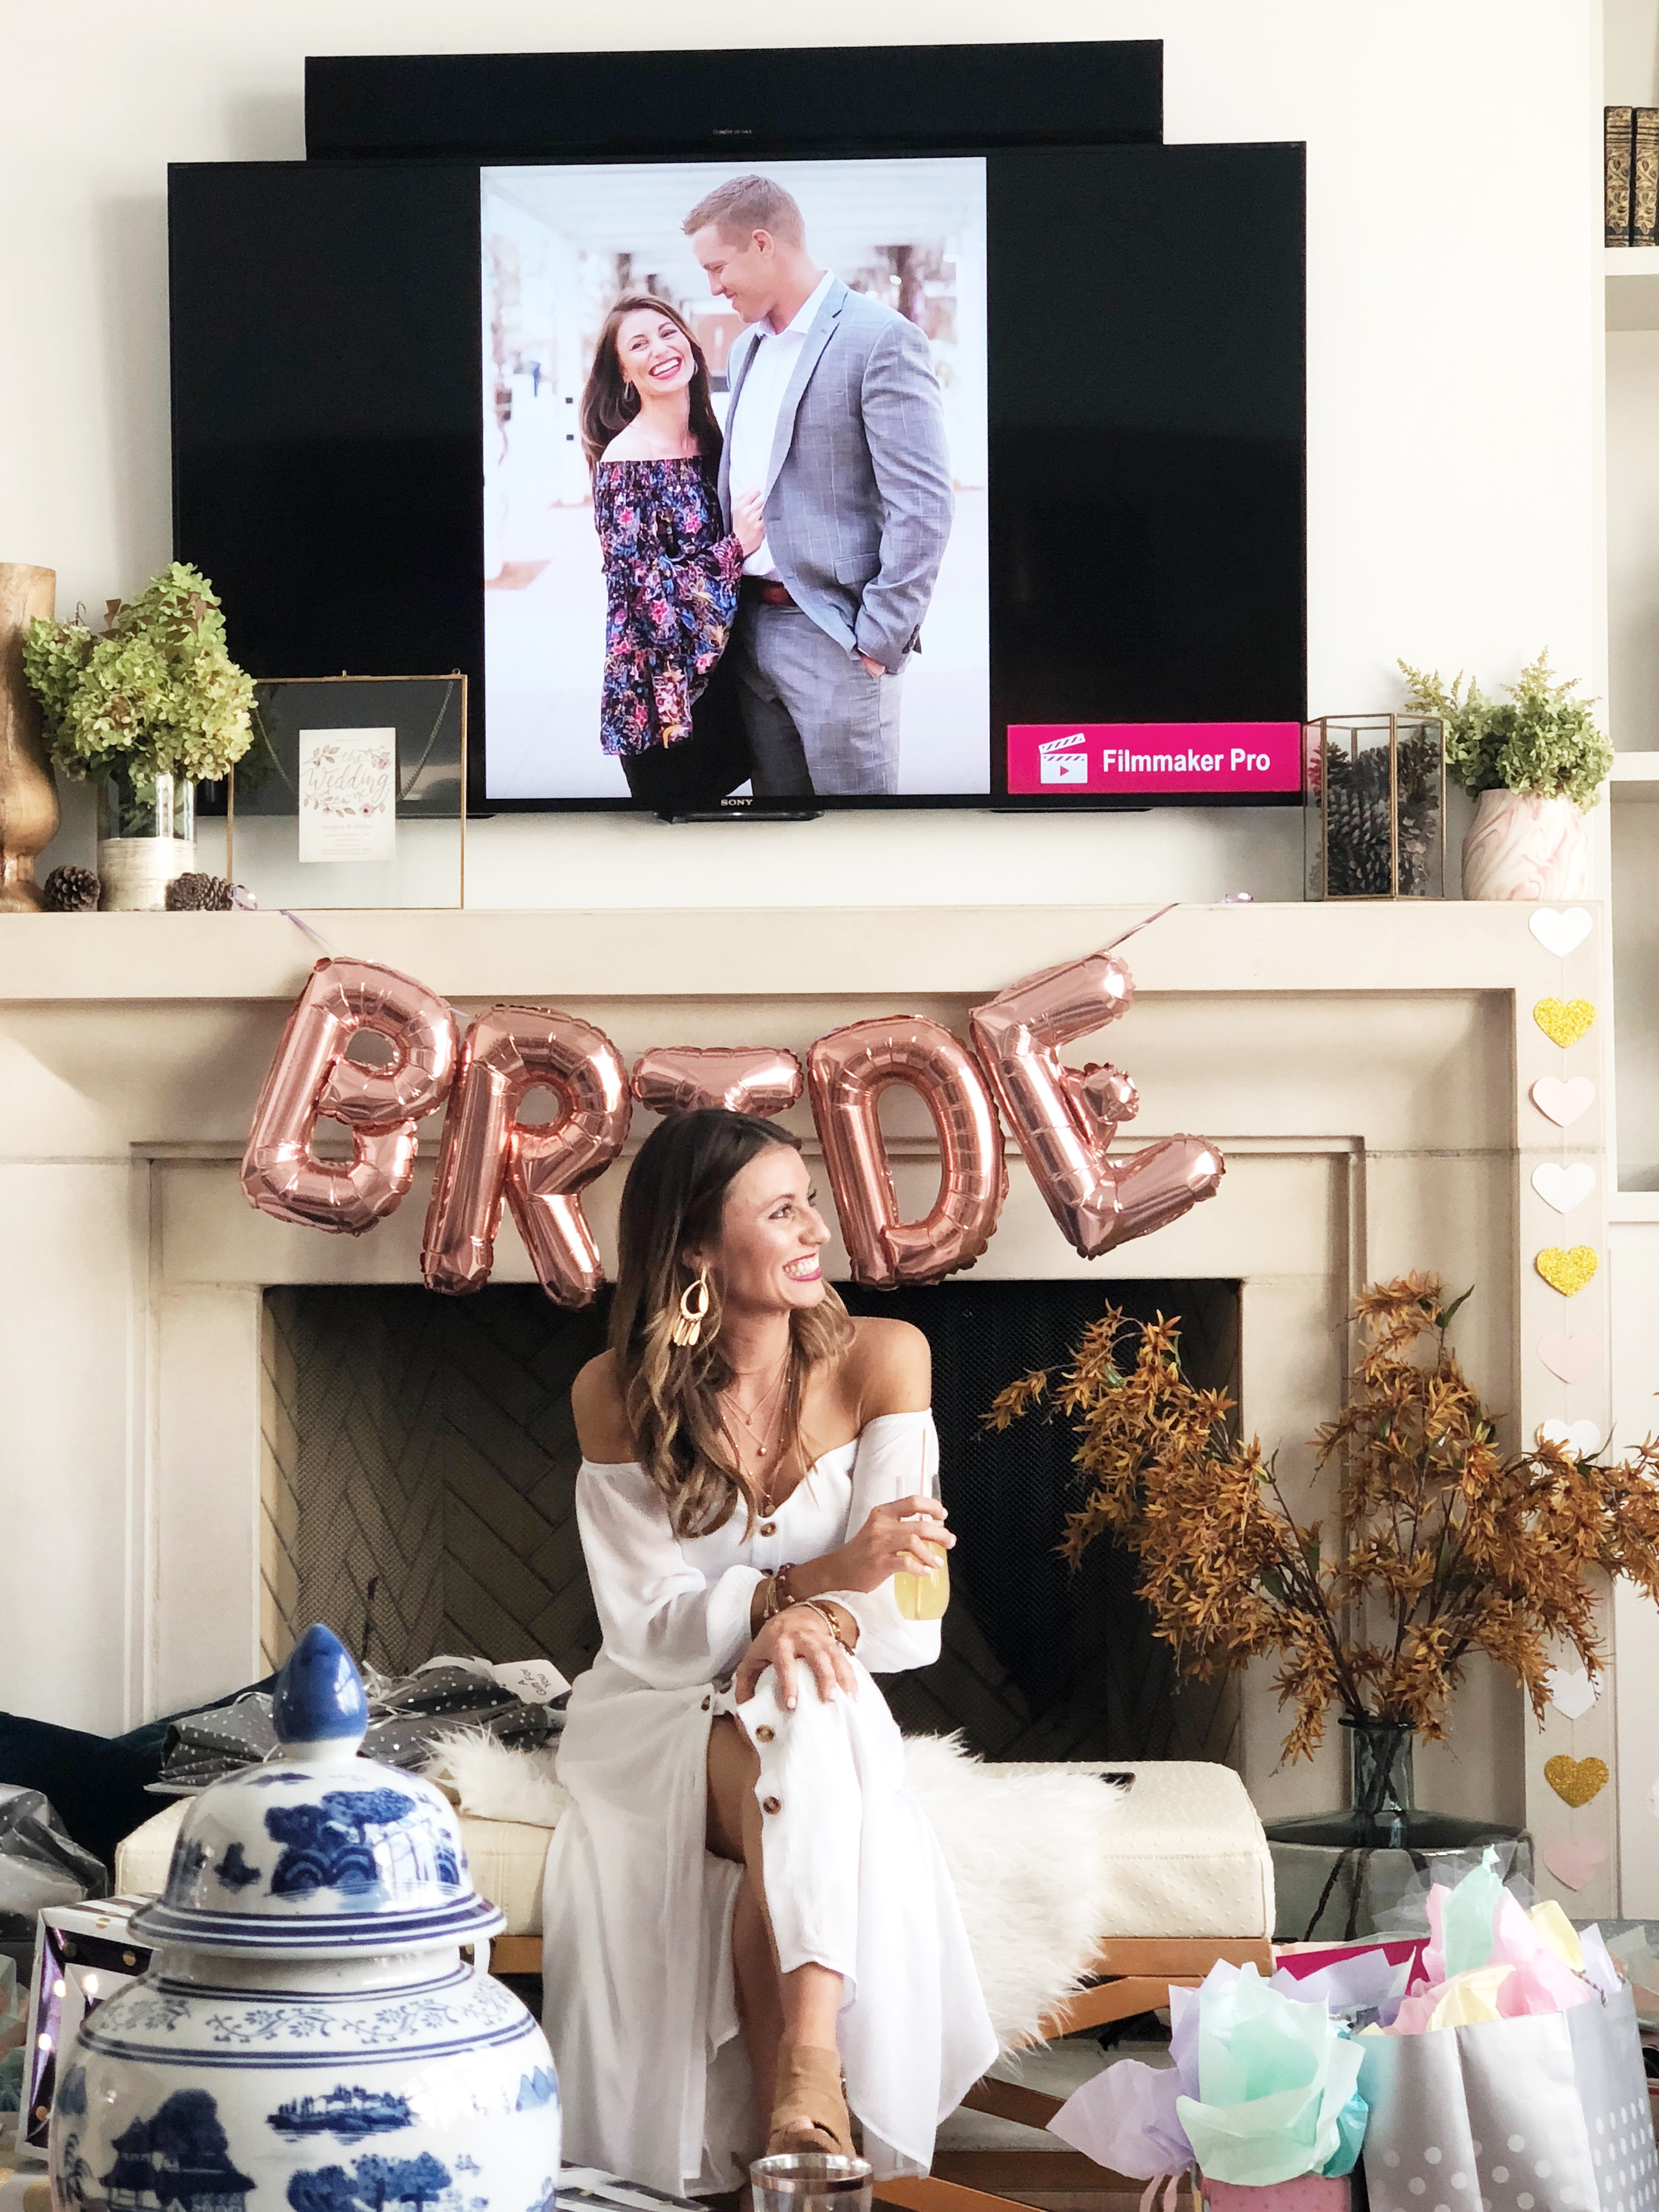 Beautiful Fall Bridal Shower Ideas bride to be in an off the shoulder button up dress holding a rose colored balloon bouquet at her bridal shower playing the newlywed game